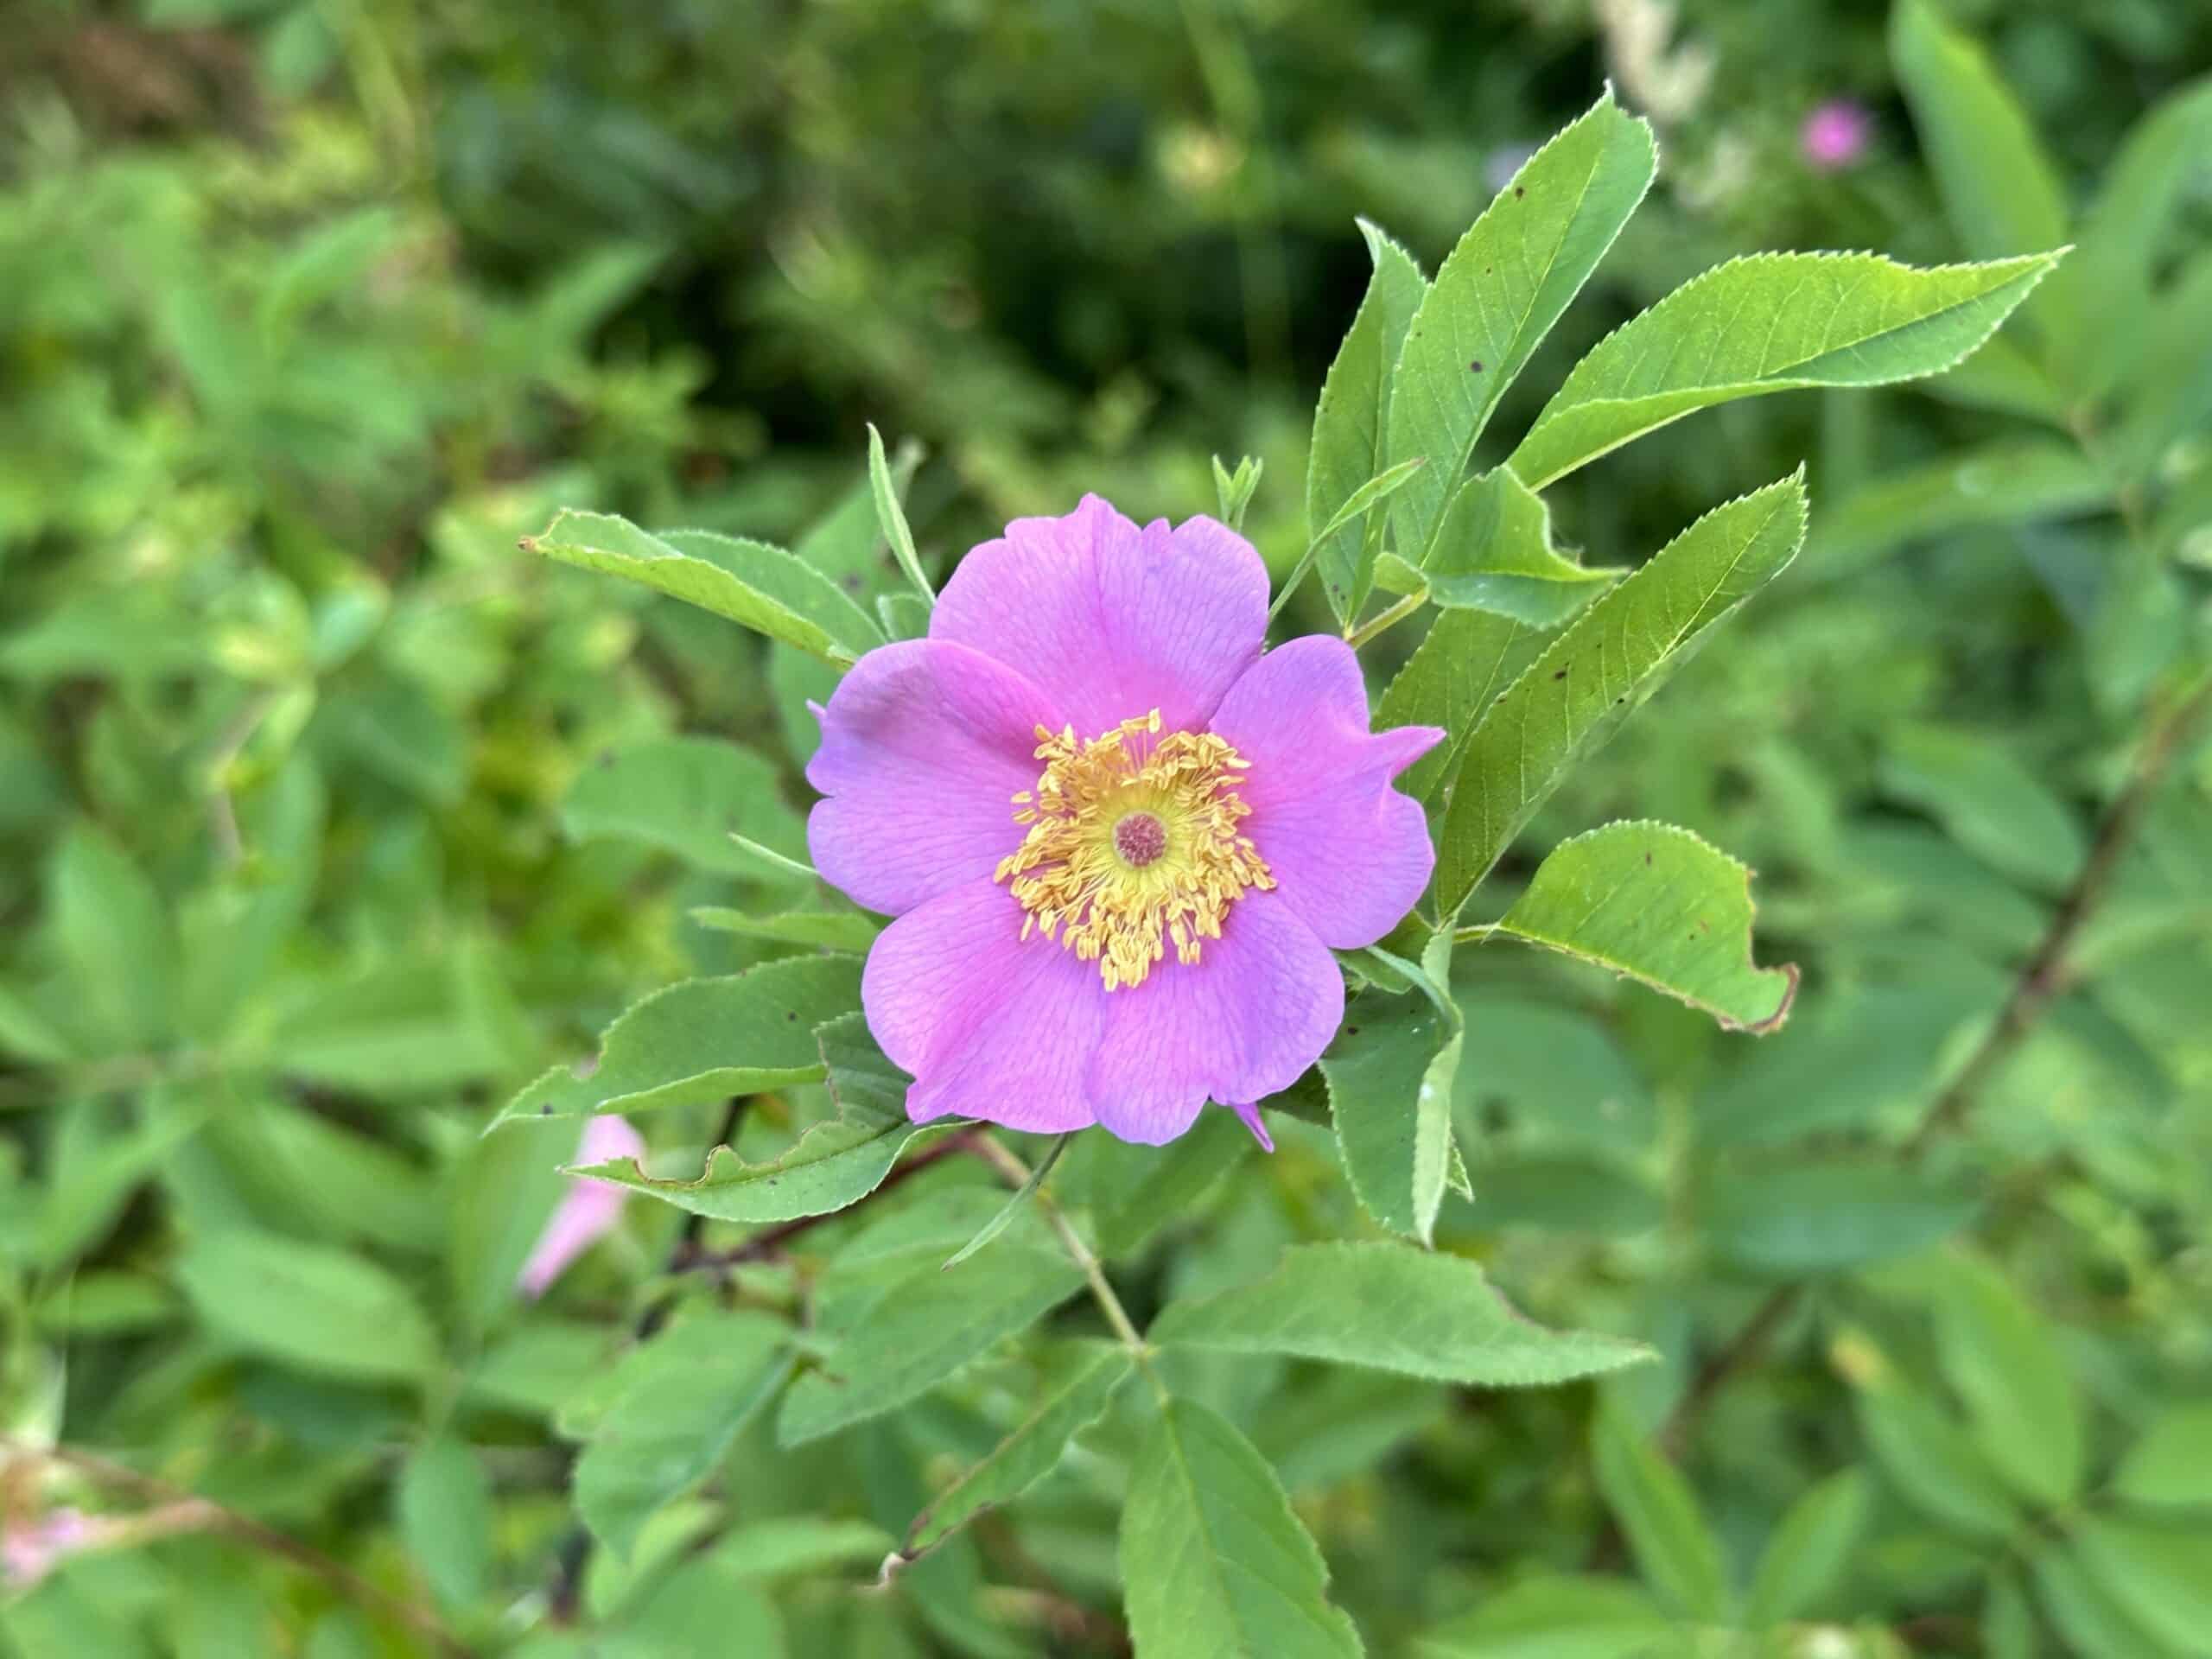 Flower of swamp rose with pink petals and yellow stamens.